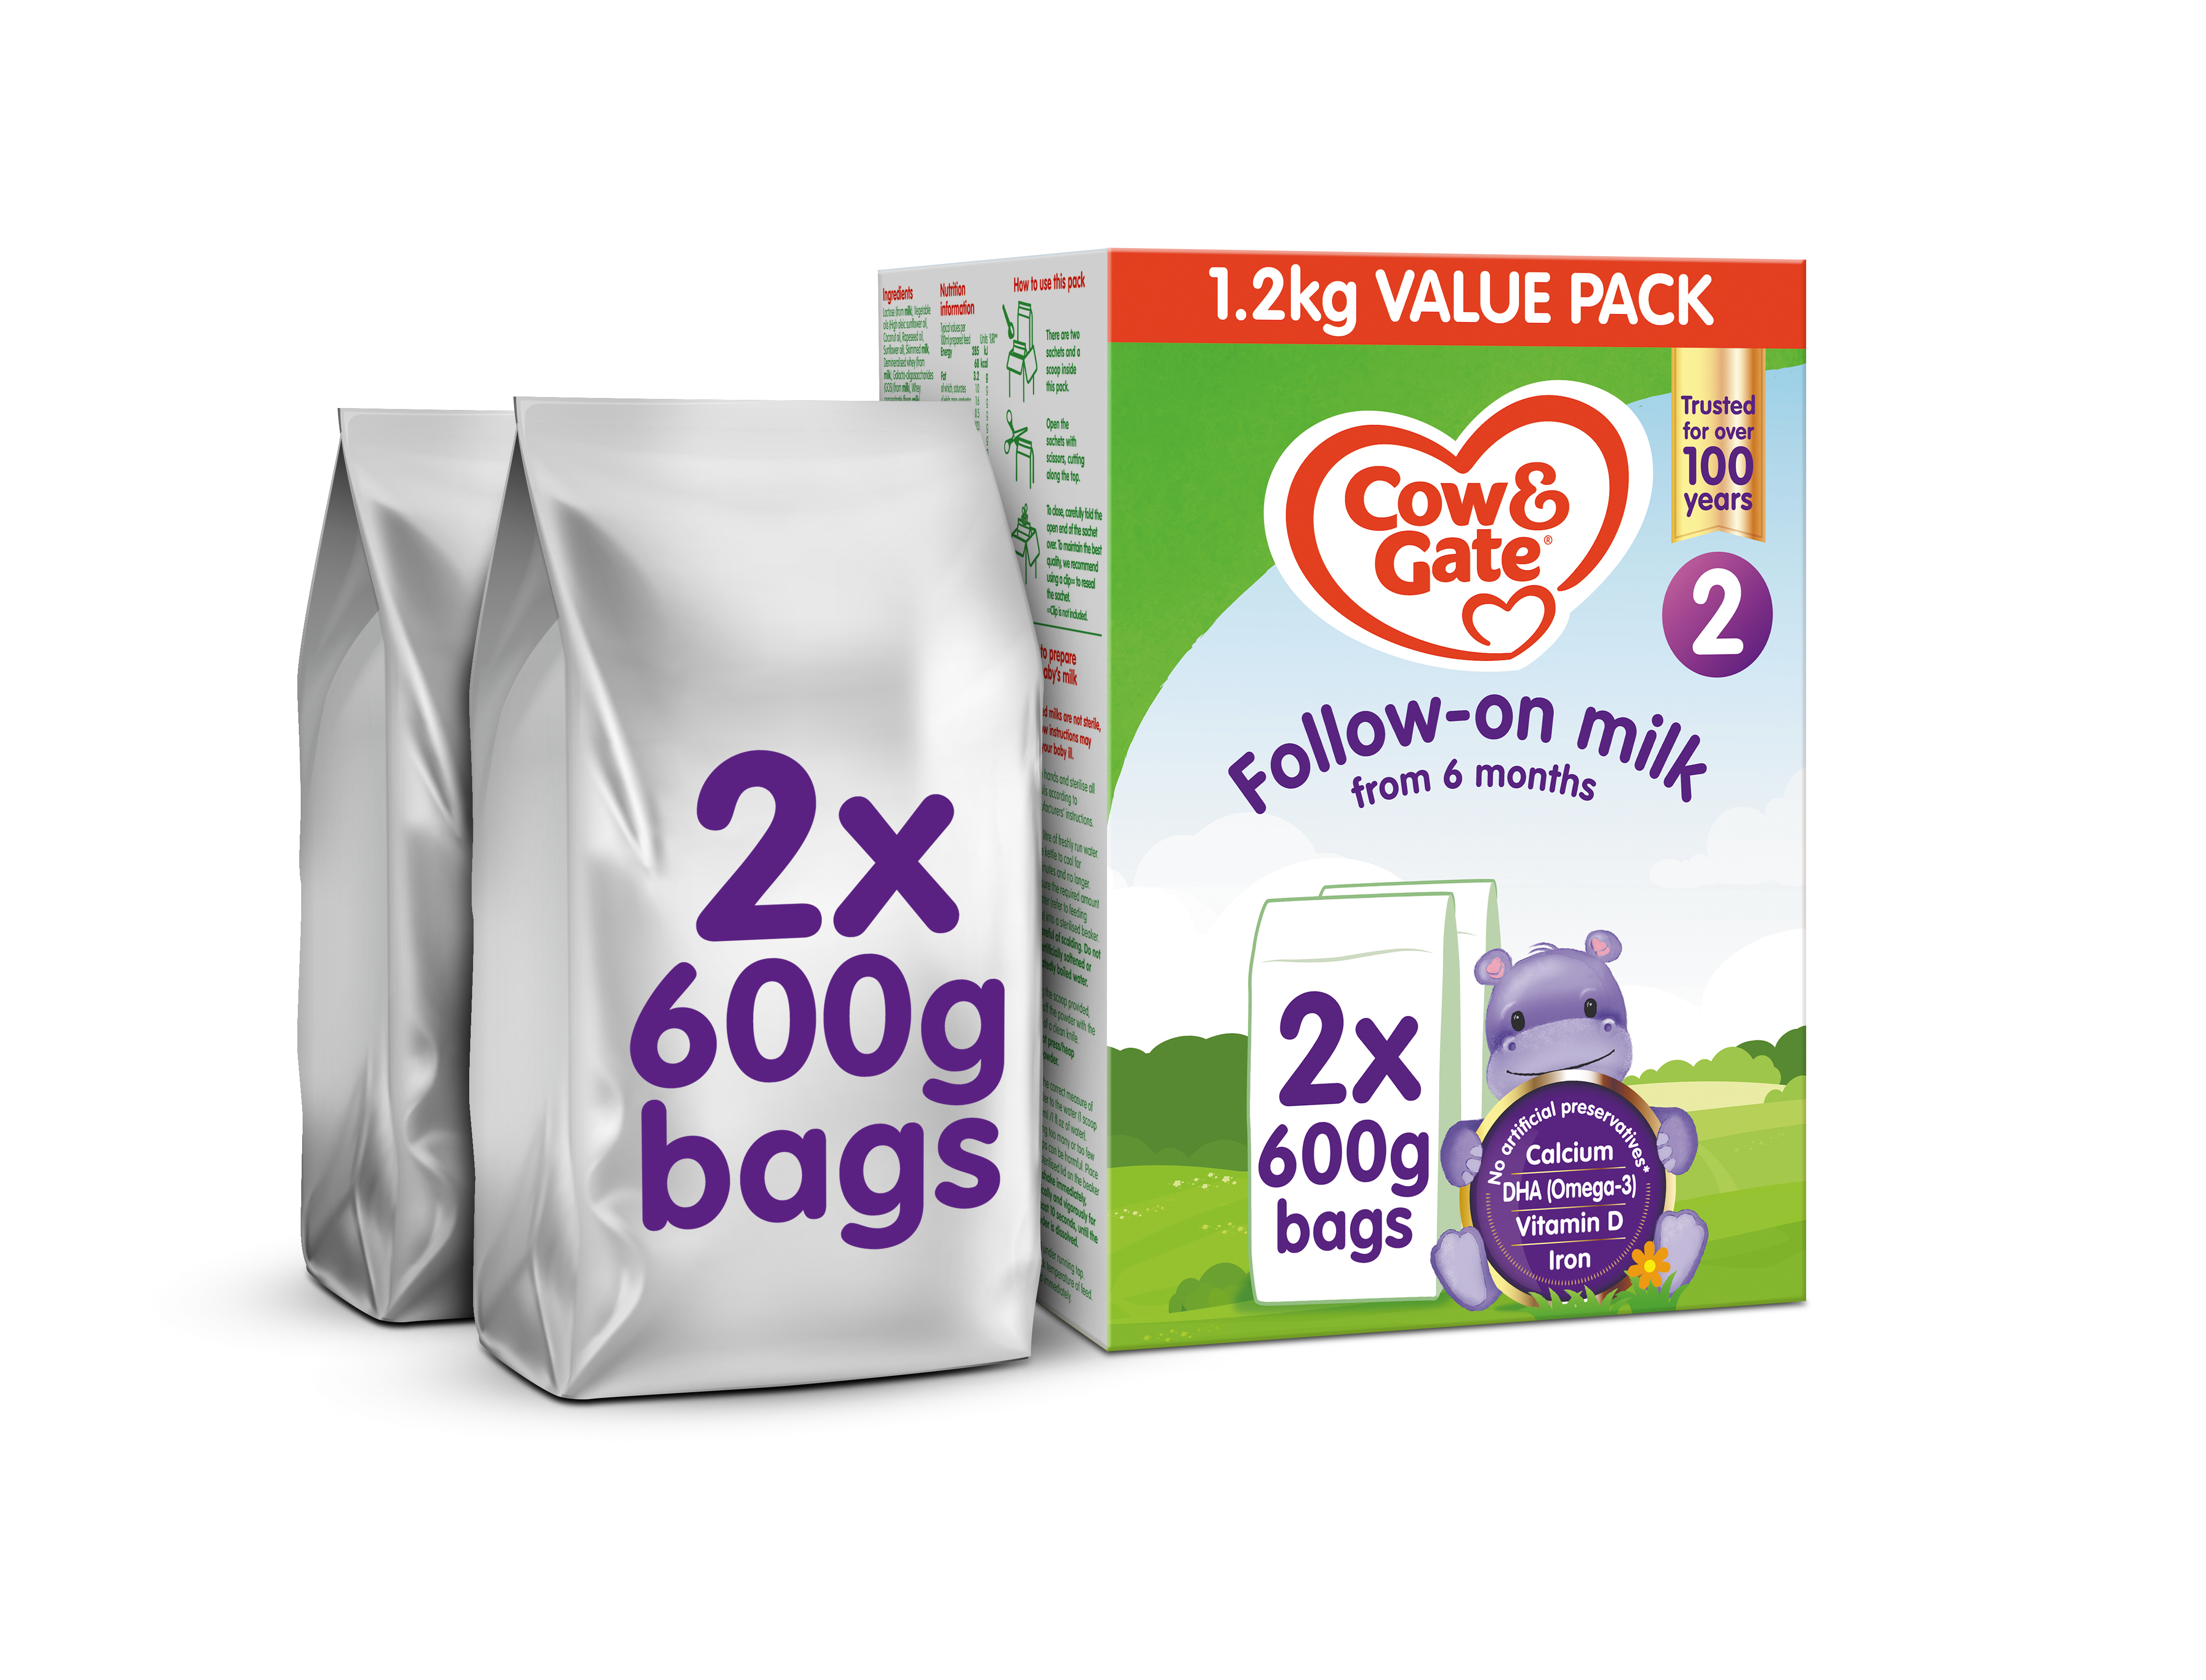 Cow & Gate Follow-on Milk Value Pack 2x600g